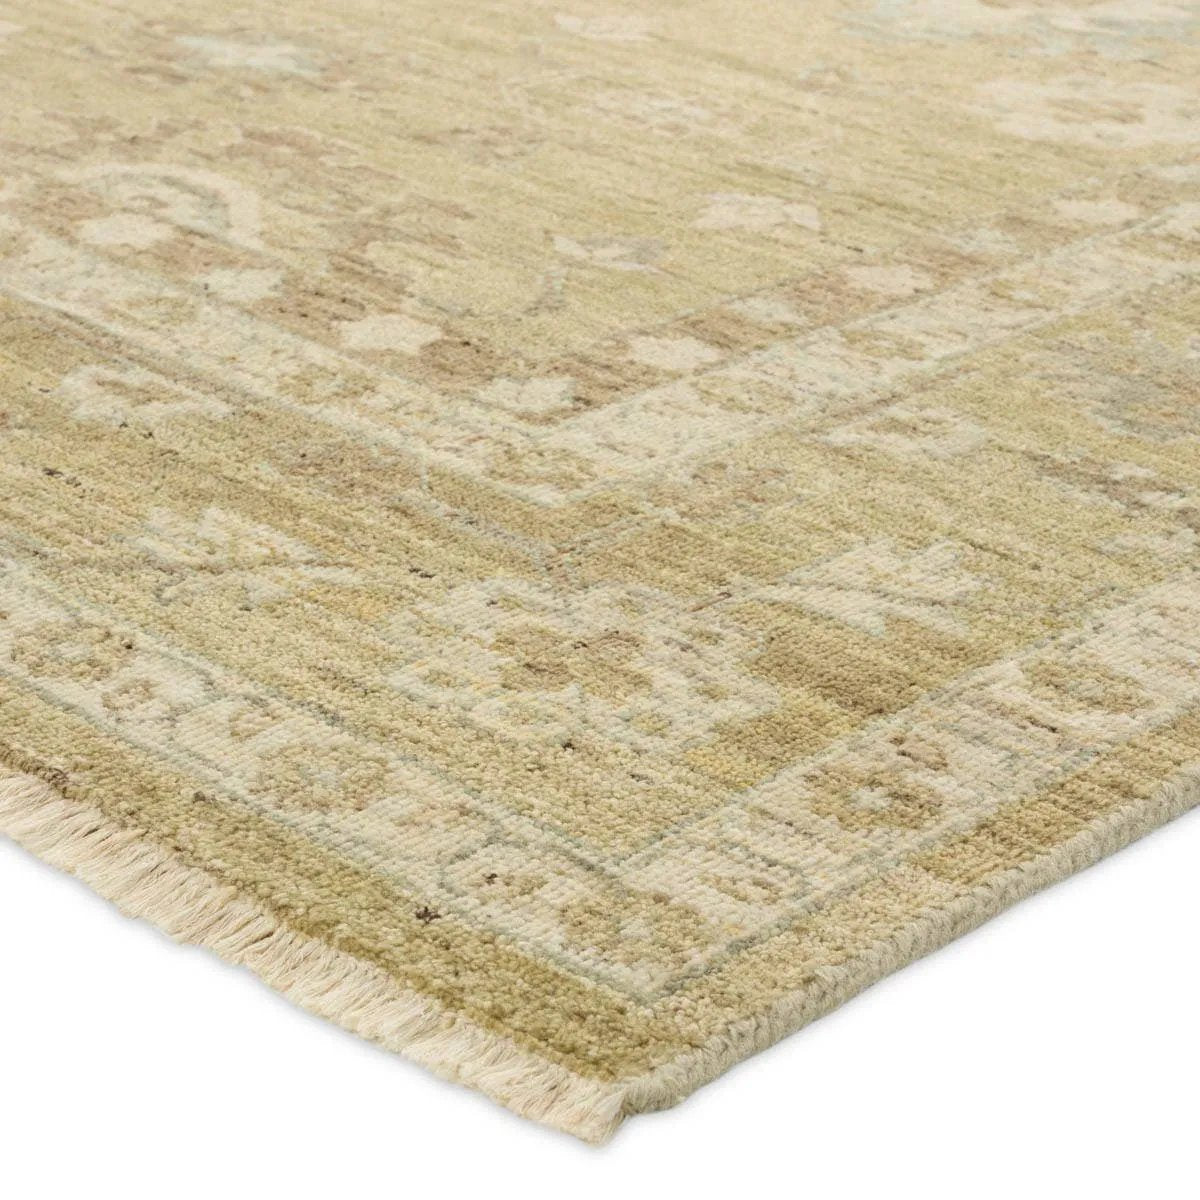 The Onessa Khalla marries traditional motifs with soft, subdued colorways for the perfect blend of fresh and time-honored style. These hand-knotted wool rugs feature a hand-sheared quality that lends the design a coveted vintage impression. The Challa rug features a floral, trellis pattern in cream and green with accents of taupe and brown. Amethyst Home provides interior design, new home construction design consulting, vintage area rugs, and lighting in the Winter Garden metro area.